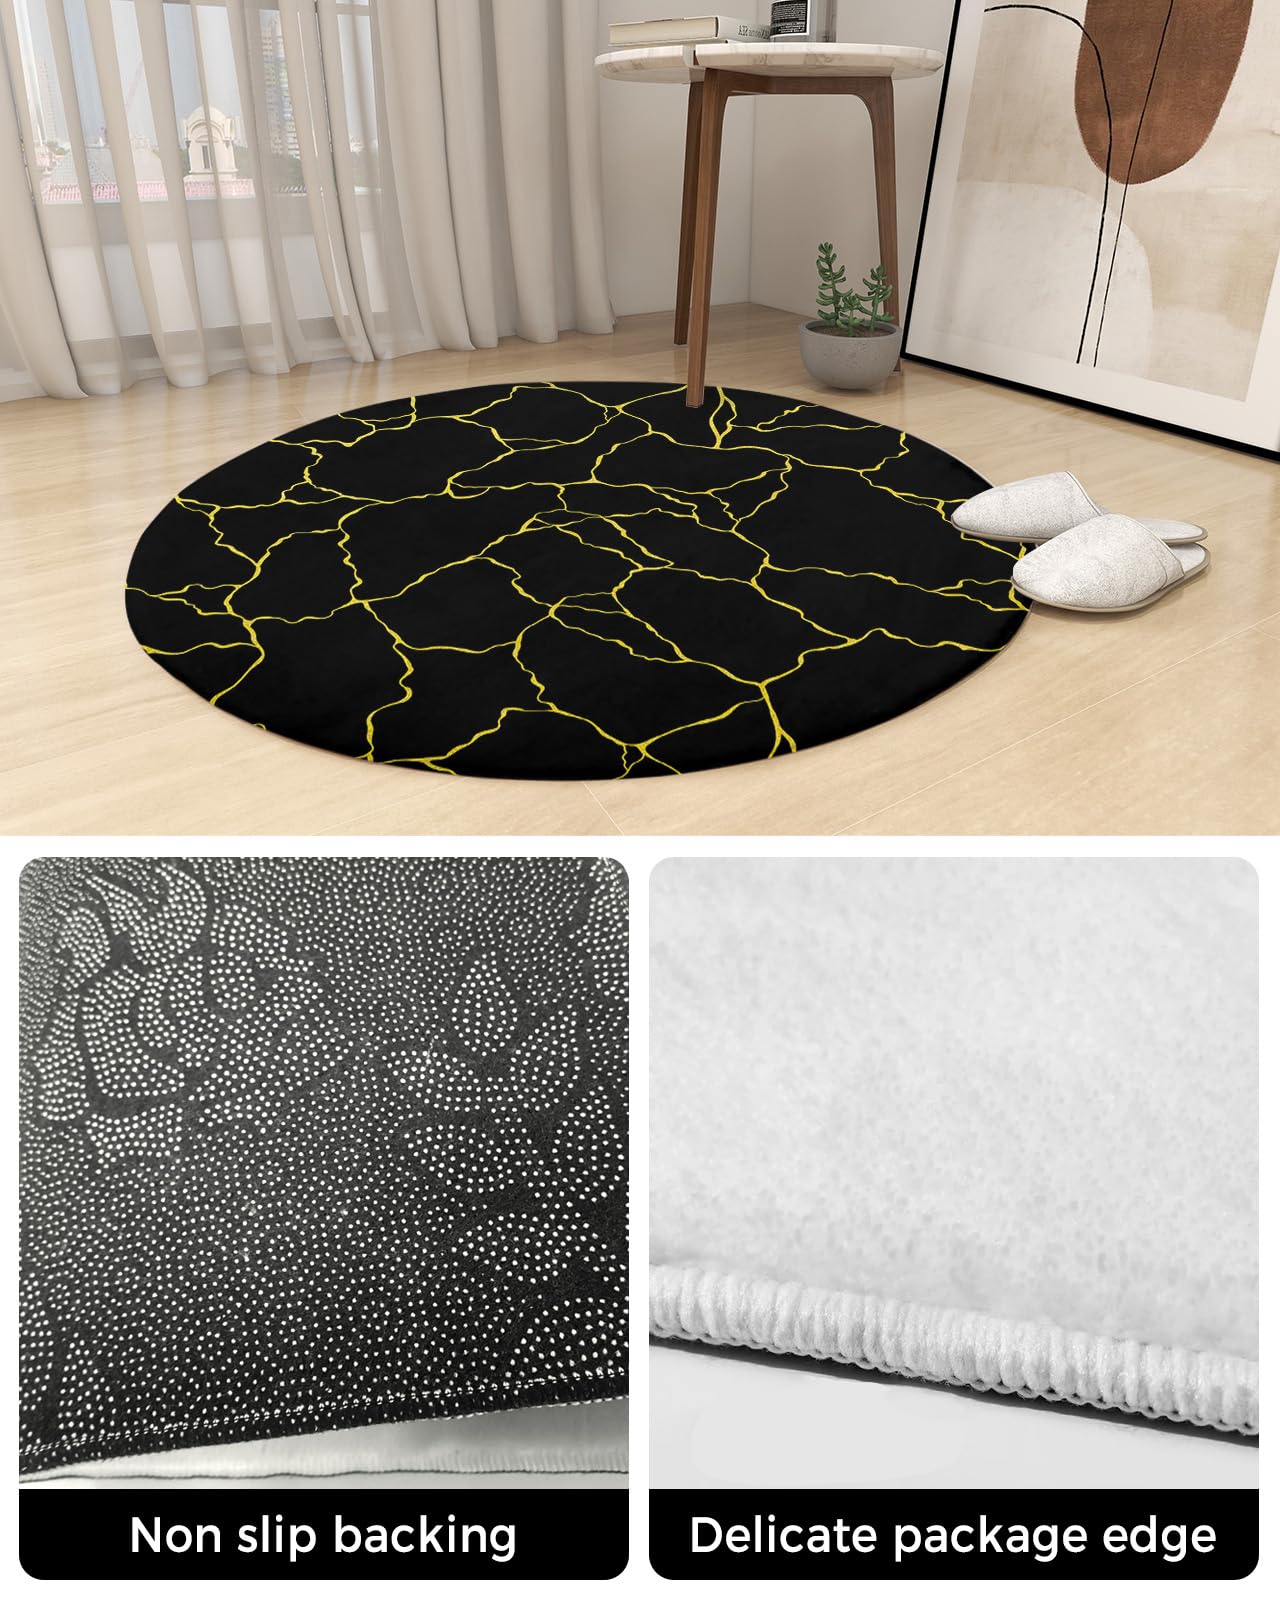 Black Gold Fluffy Round Area Rug Carpets 4ft, Plush Shaggy Carpet Soft Circular Rugs, Non-Slip Fuzzy Accent Floor Mat for Living Room Bedroom Nursery Home Decor Modern Geometric Abstract Art